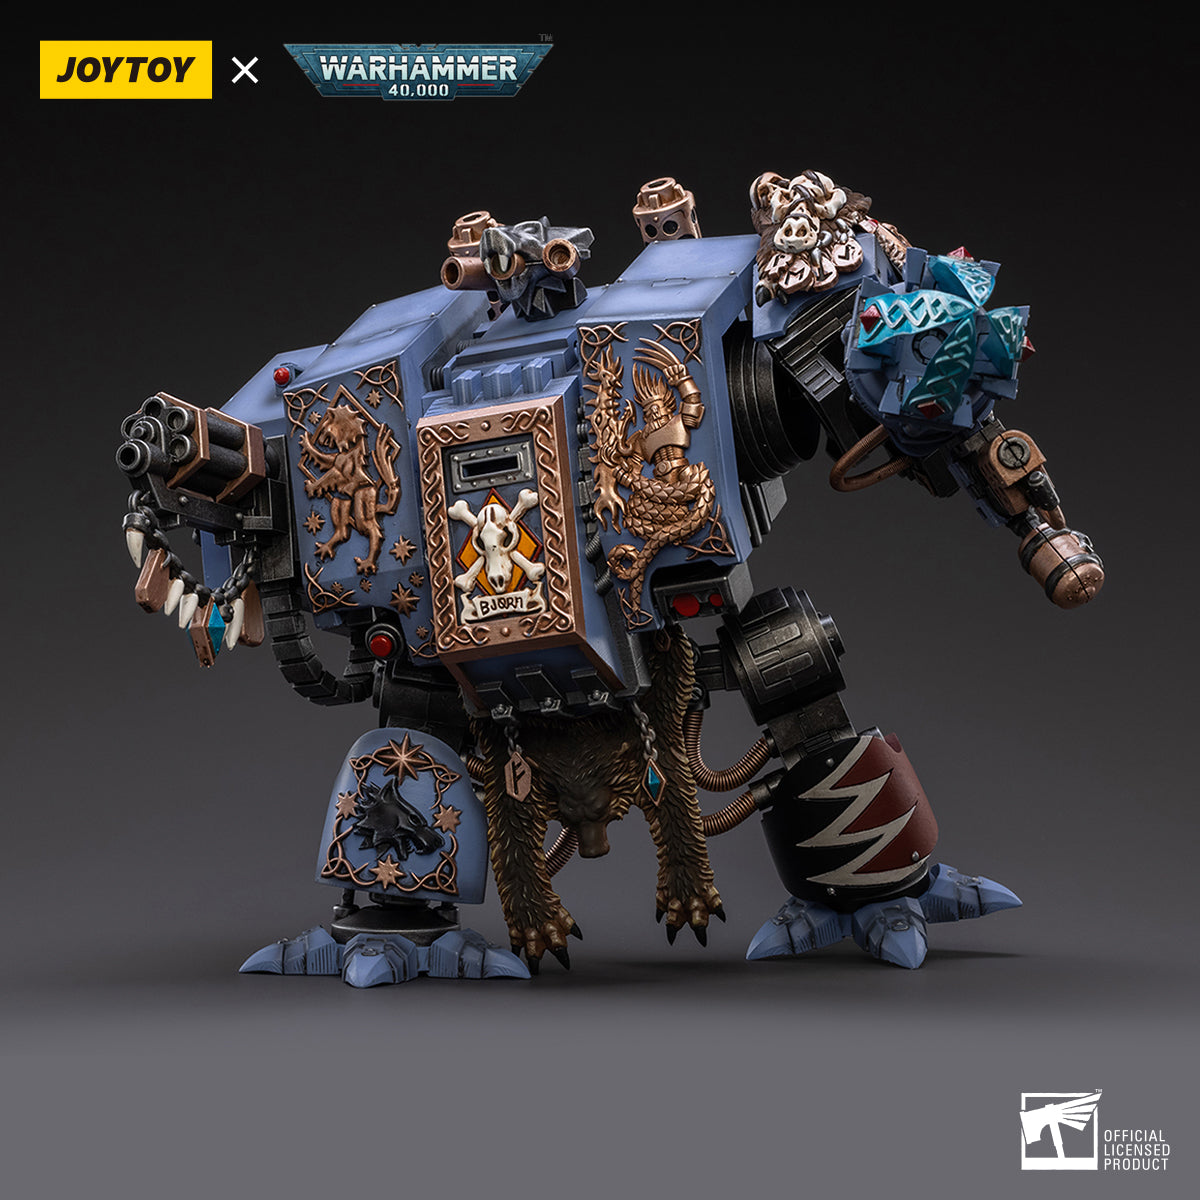 Warhammer Collectibles: 1/18 Scale Space Wolves Bjorn the Fell-Handed